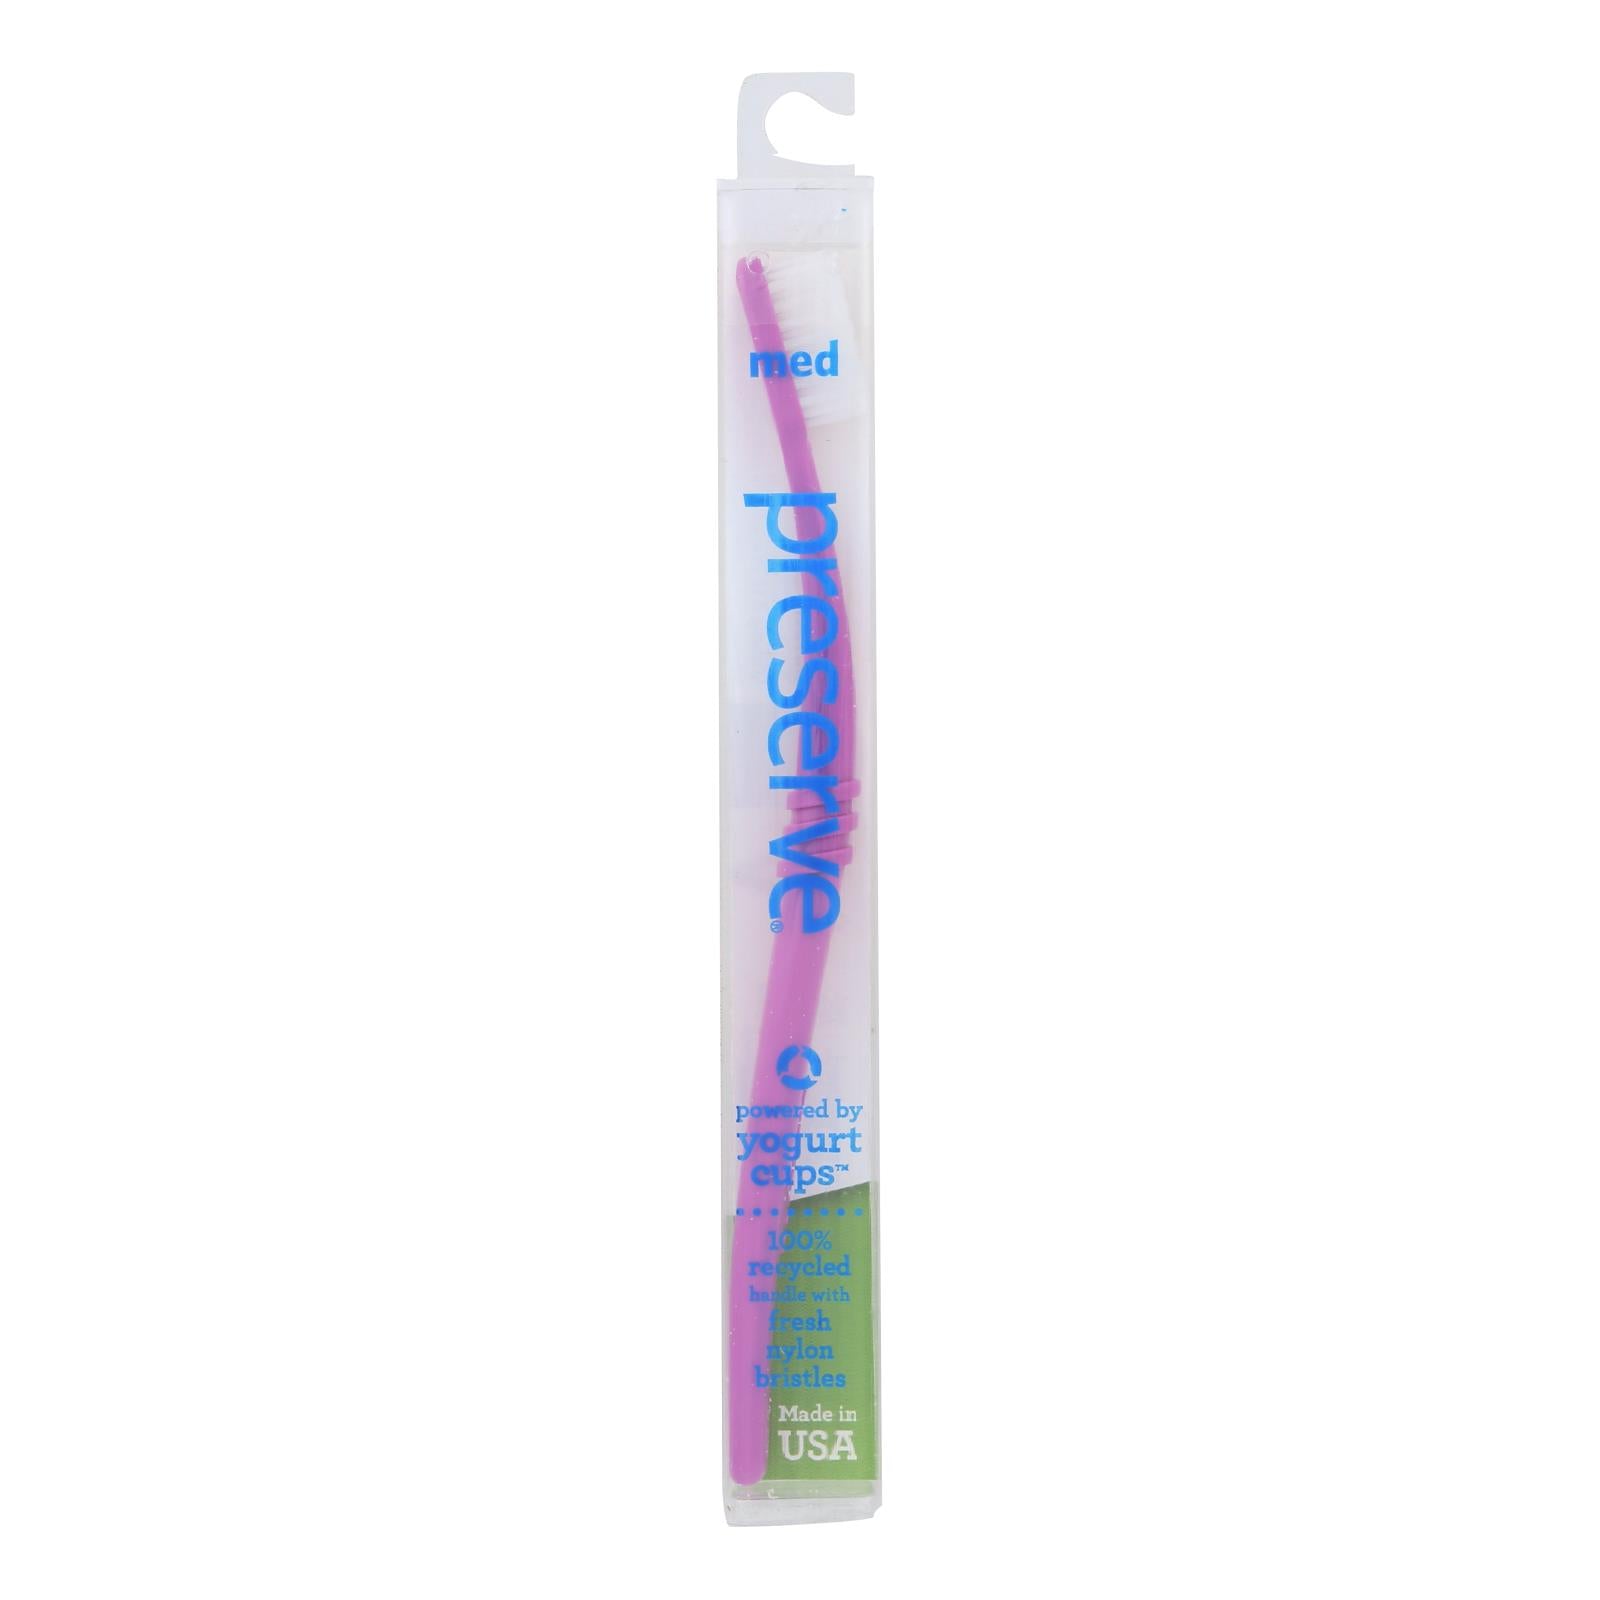 Preserve Toothbrush Is A Travel Case Medium - 6 Pack - Assorted Colors